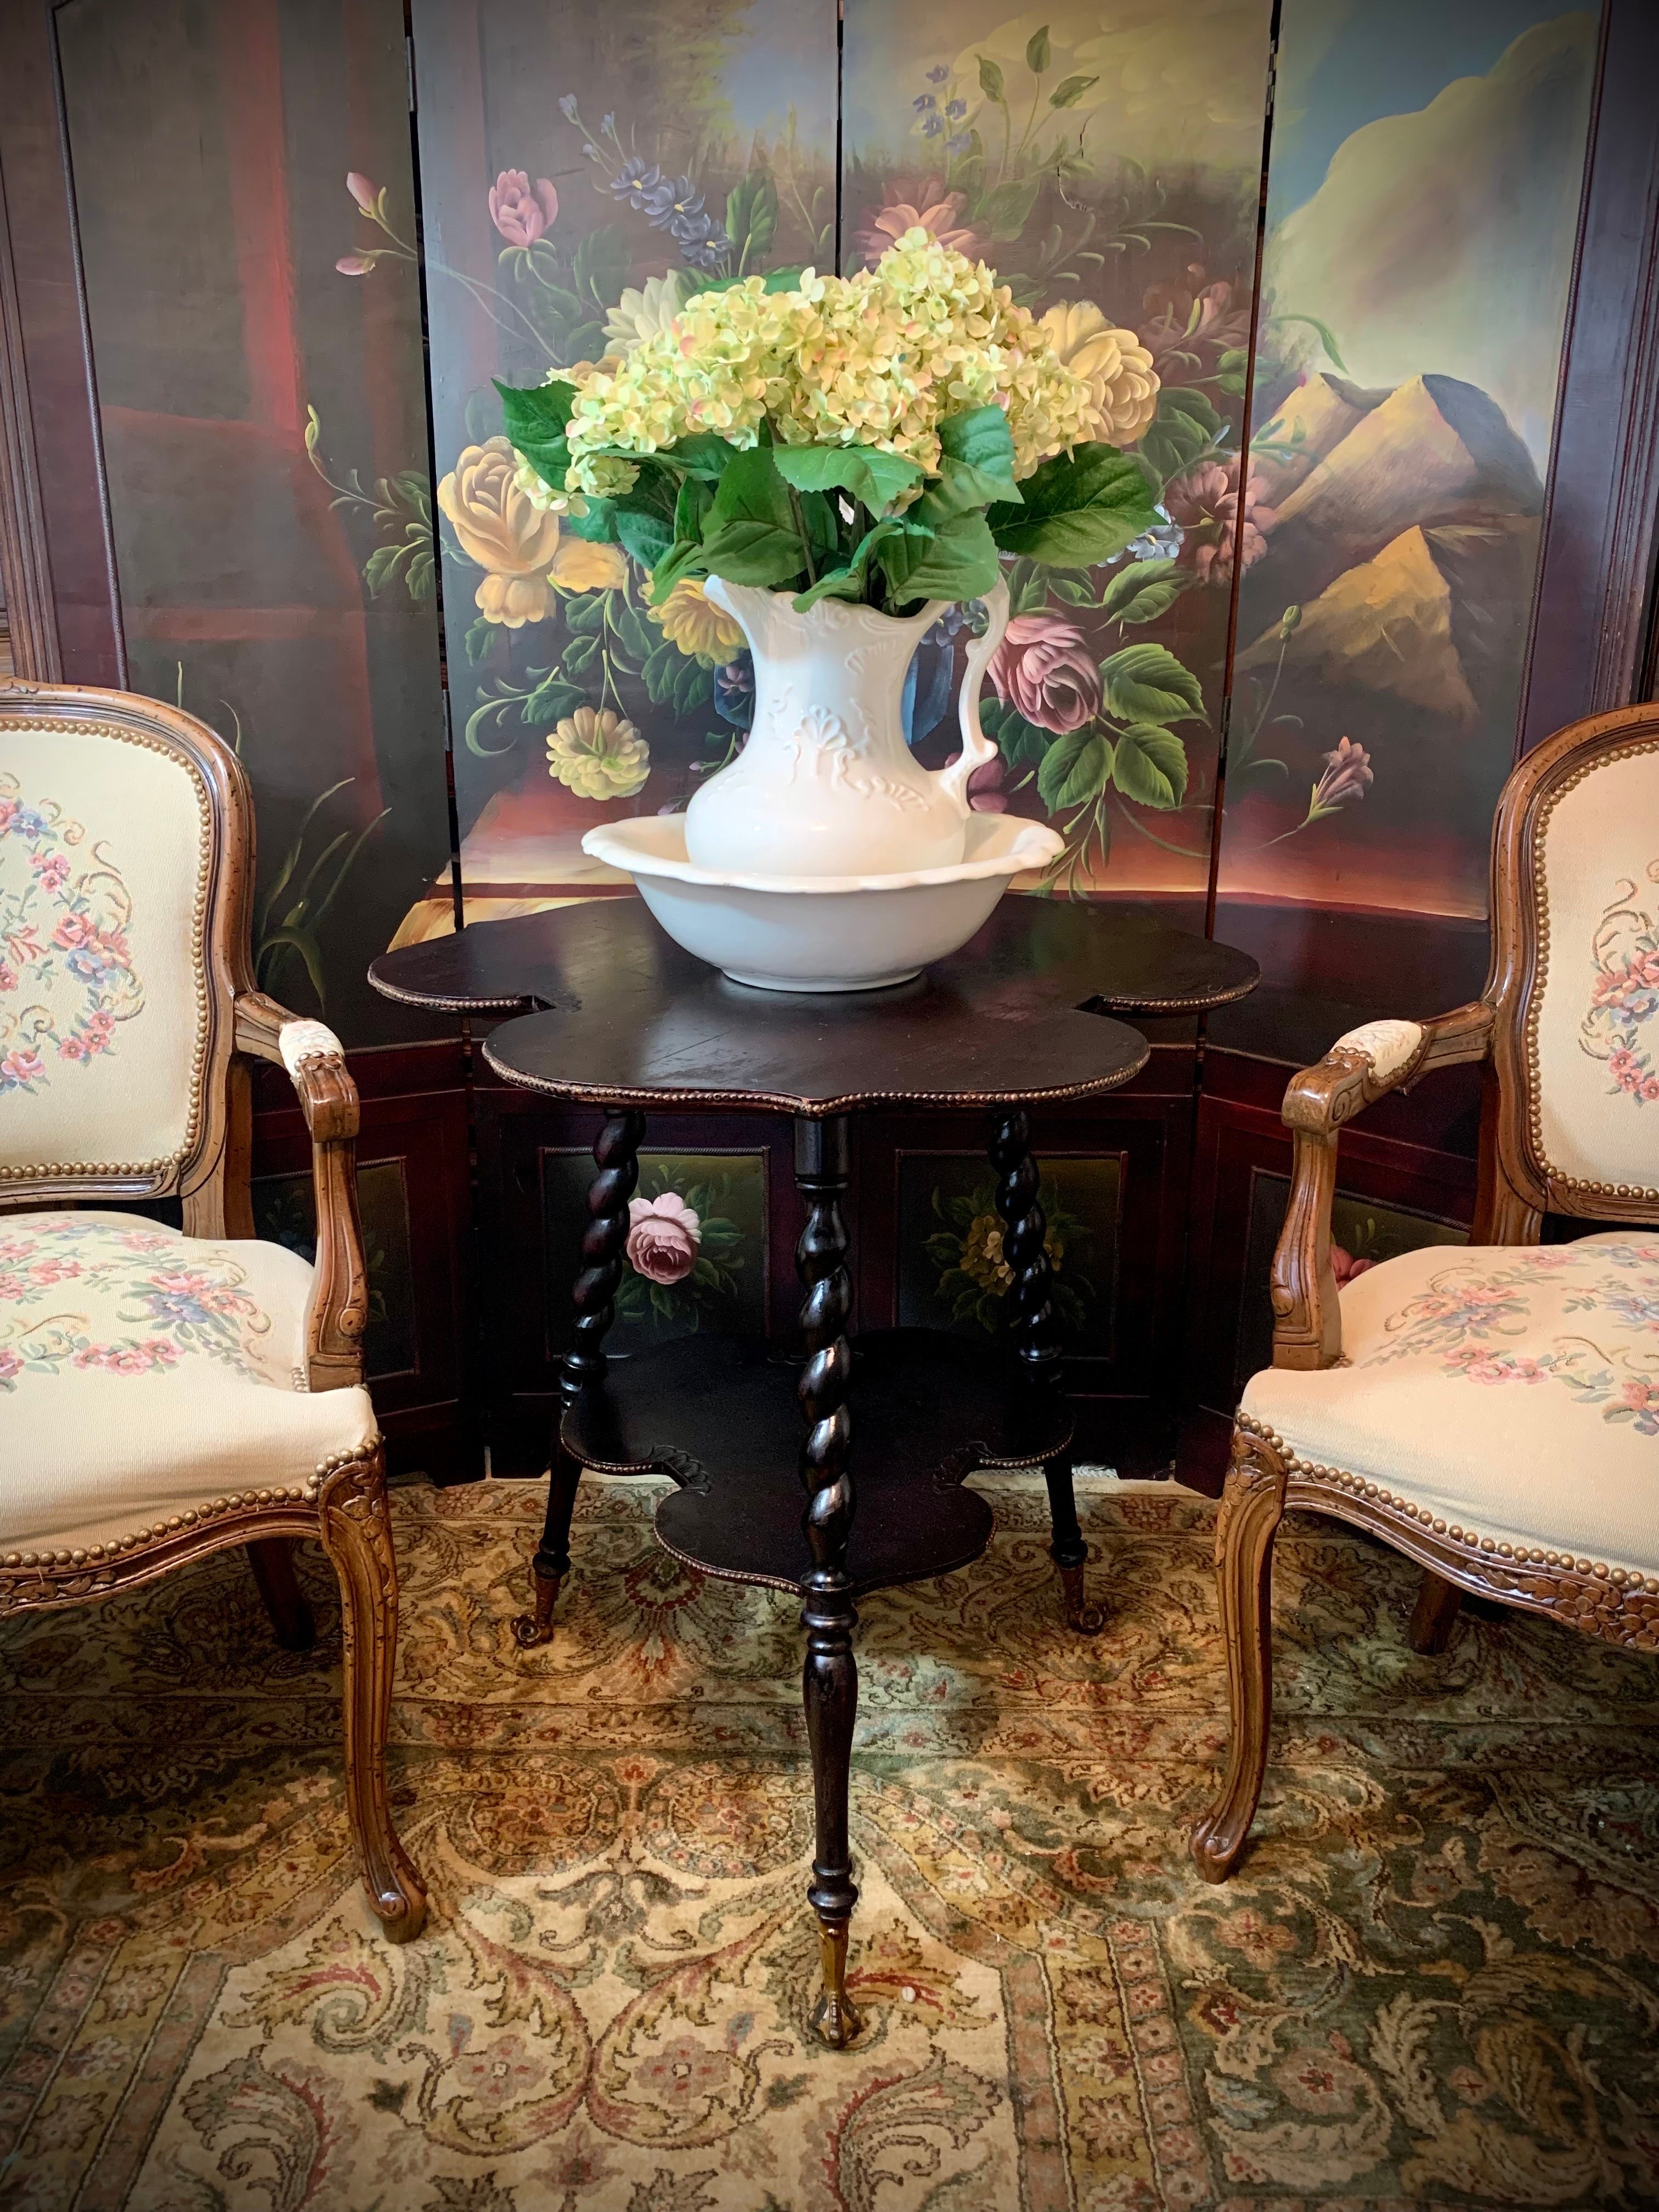 This rare antique cloverleaf garden table provides an elegant way to display eye-catching seasonal floral arrangement, just as it originally found it’s place in the iconic English garden rooms of the 18th century. Also, used as a tea table.

Spiral